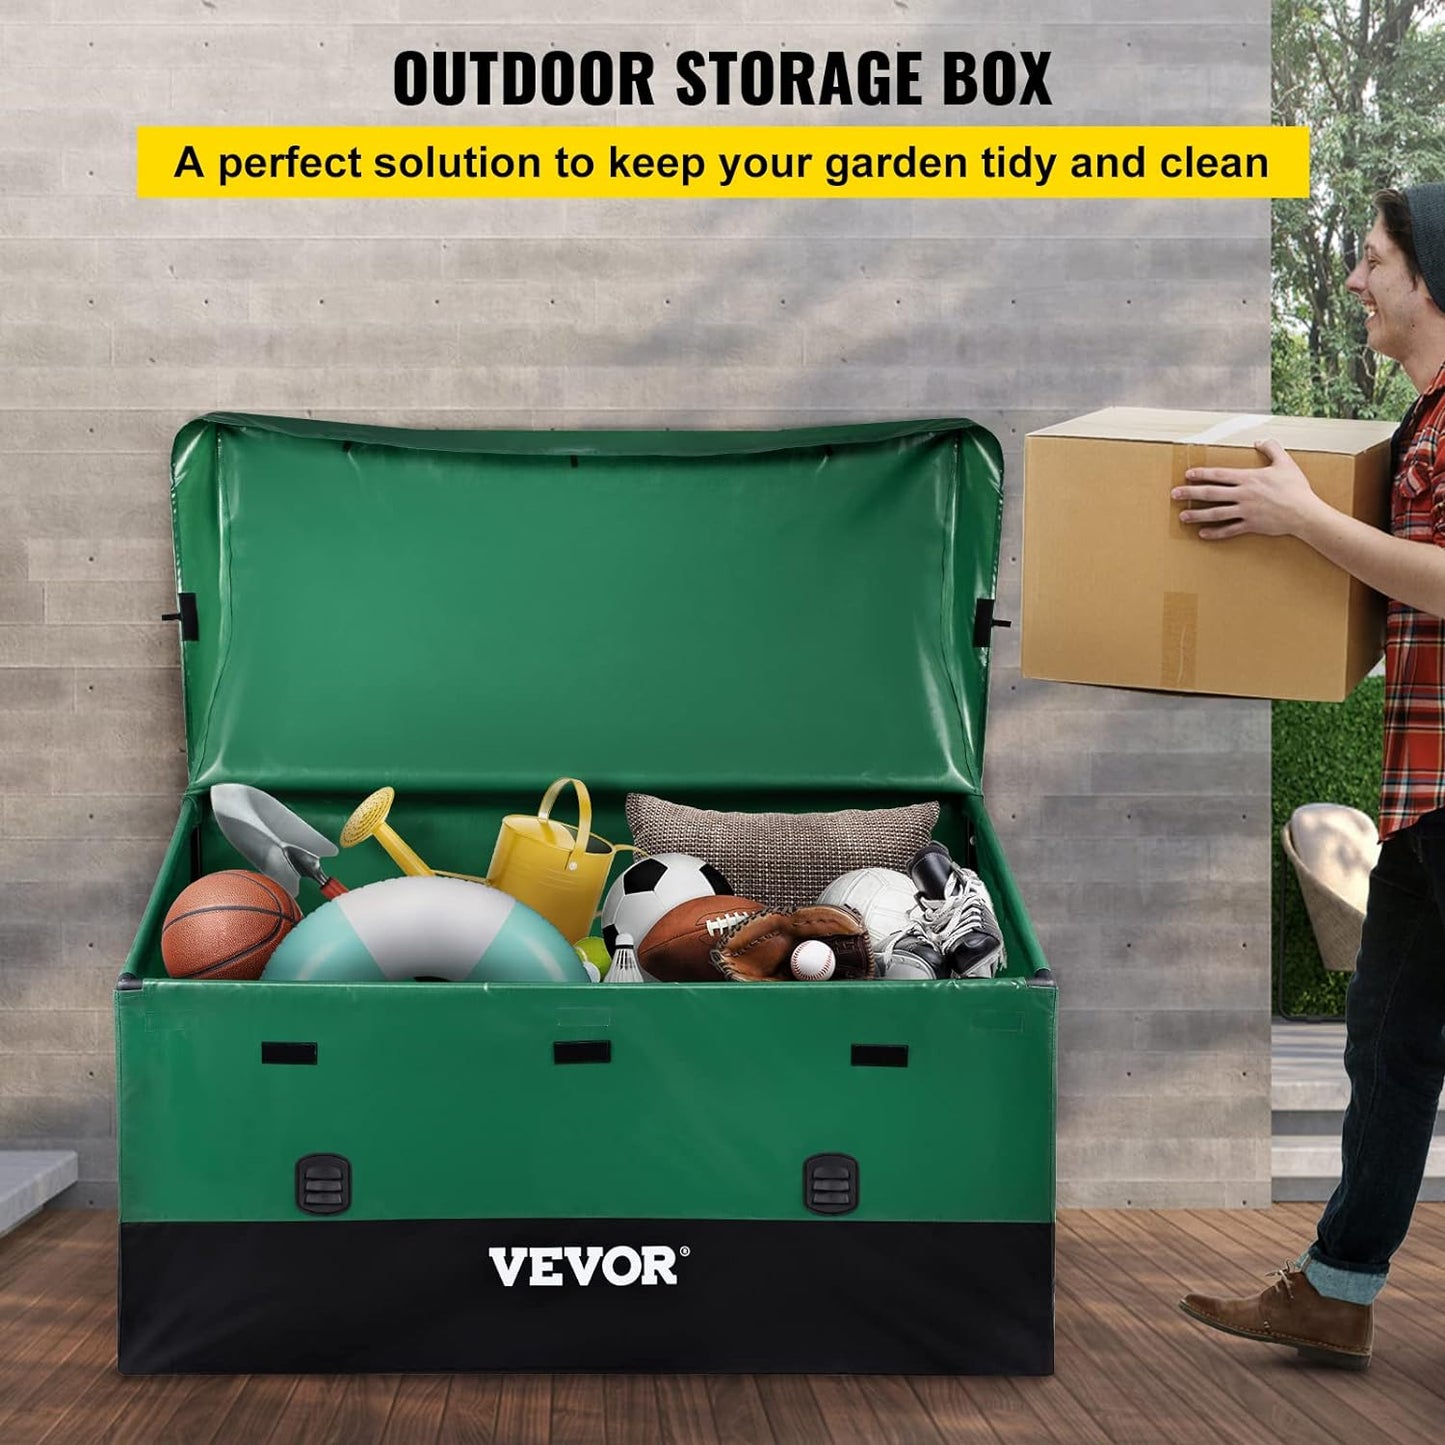 VEVOR Outdoor Storage Box, 150 Gallon Waterproof PE Tarpaulin Deck Box w\/Galvanized Frame, All-Weather Protection & Portable, for Camping, Garden, Poolside, and Yard, Black & Green